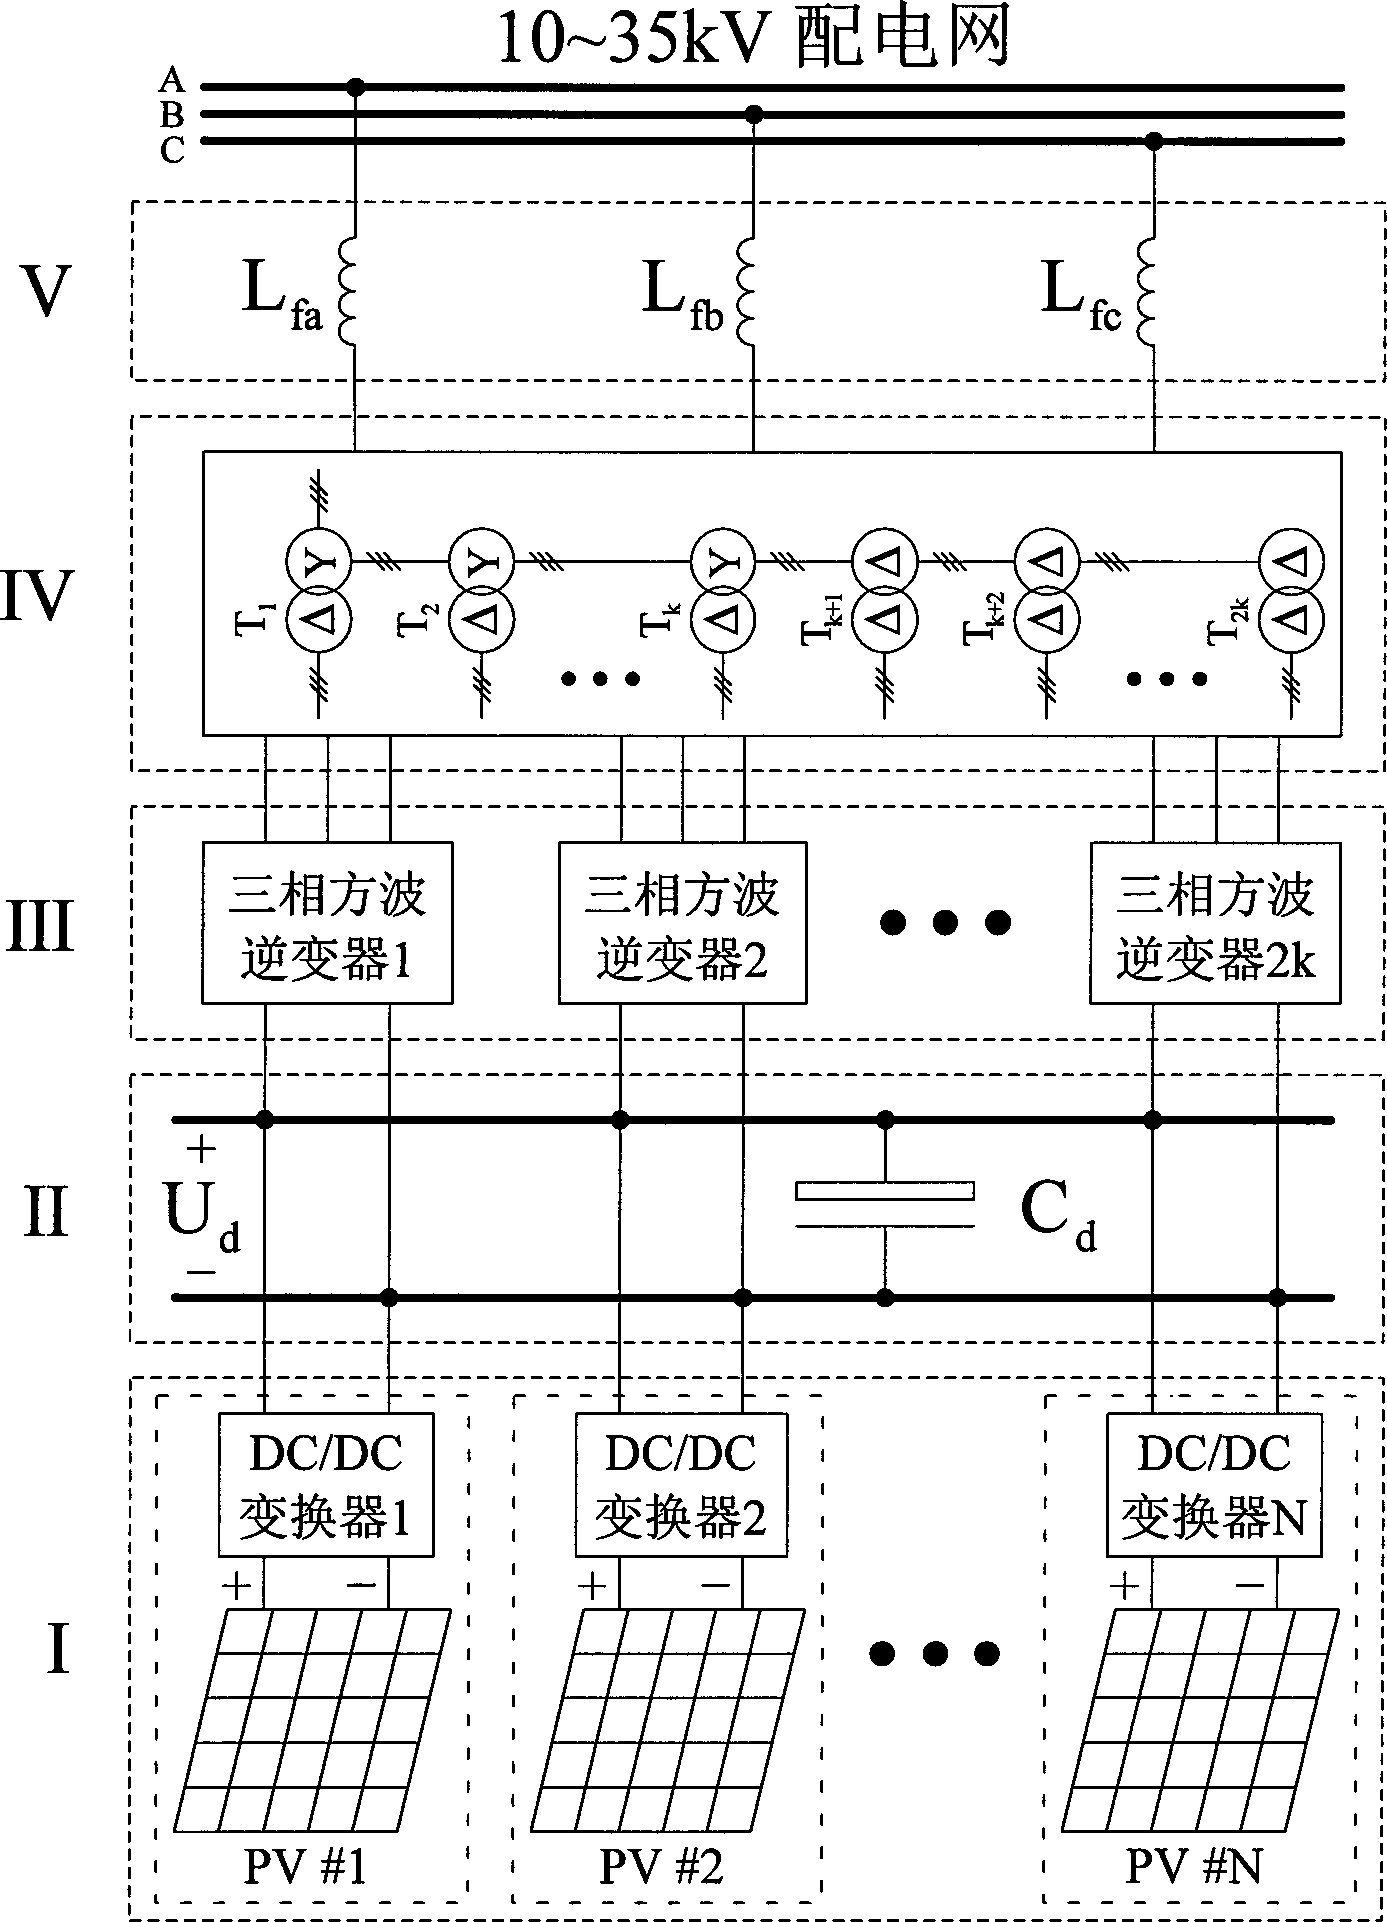 Photovoltaic grid-connected power generation device based on multilevel technique